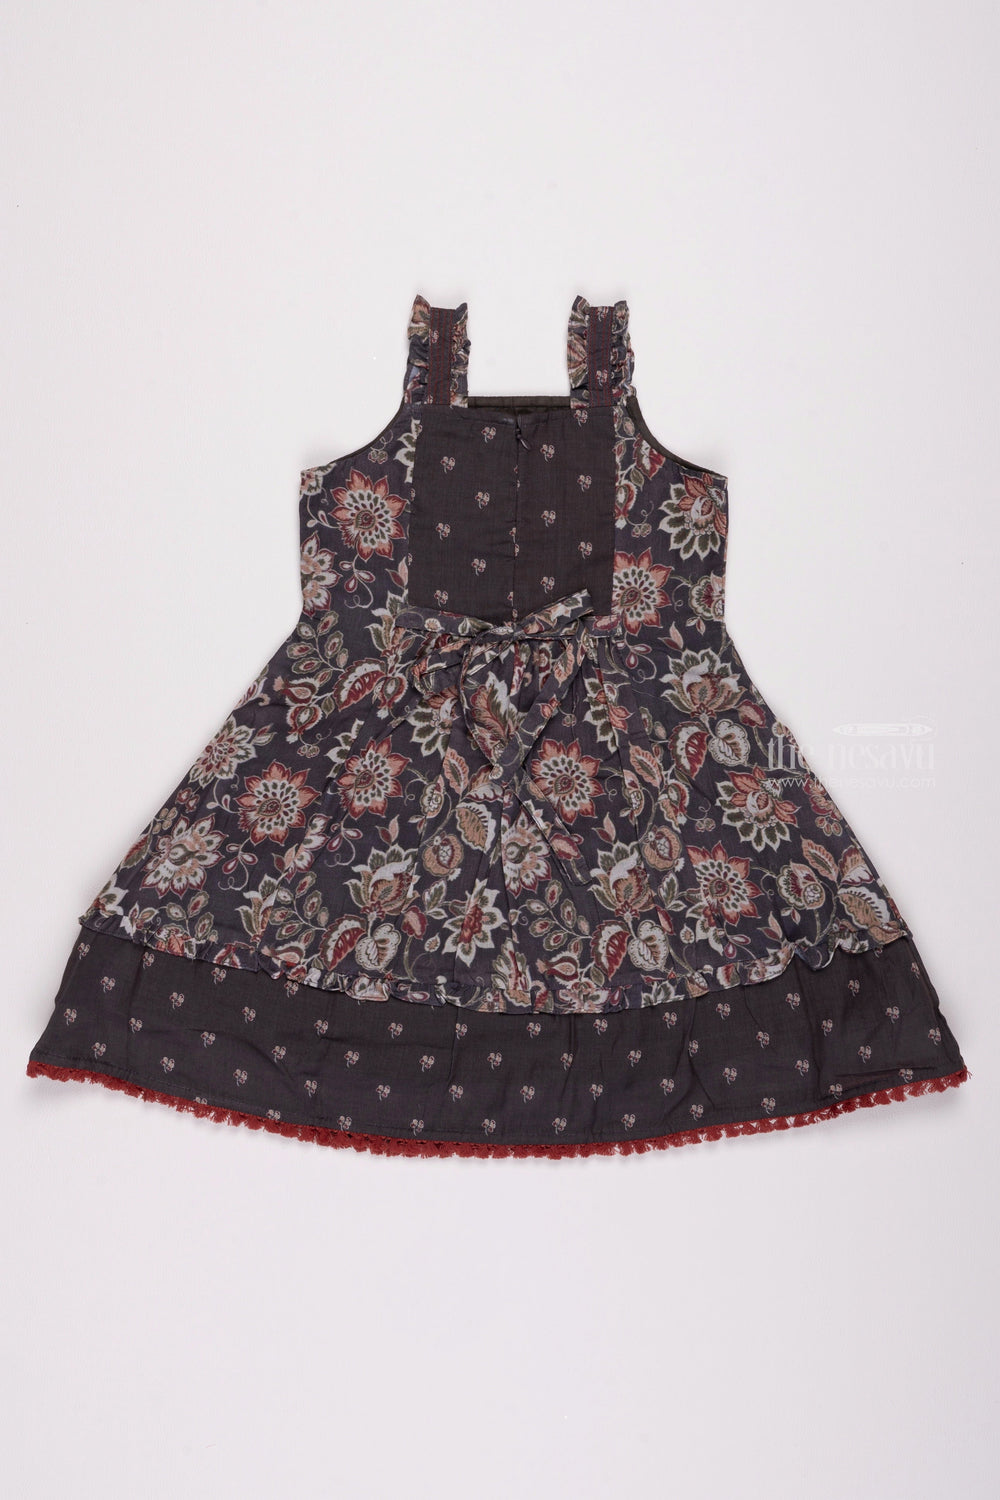 The Nesavu Girls Cotton Frock Blue Bloom: Floral Printed Pleated Blue Cotton Frock for Girls Nesavu Stylish & Comfy: Browse Our Range of Cotton Frocks for Baby Girls